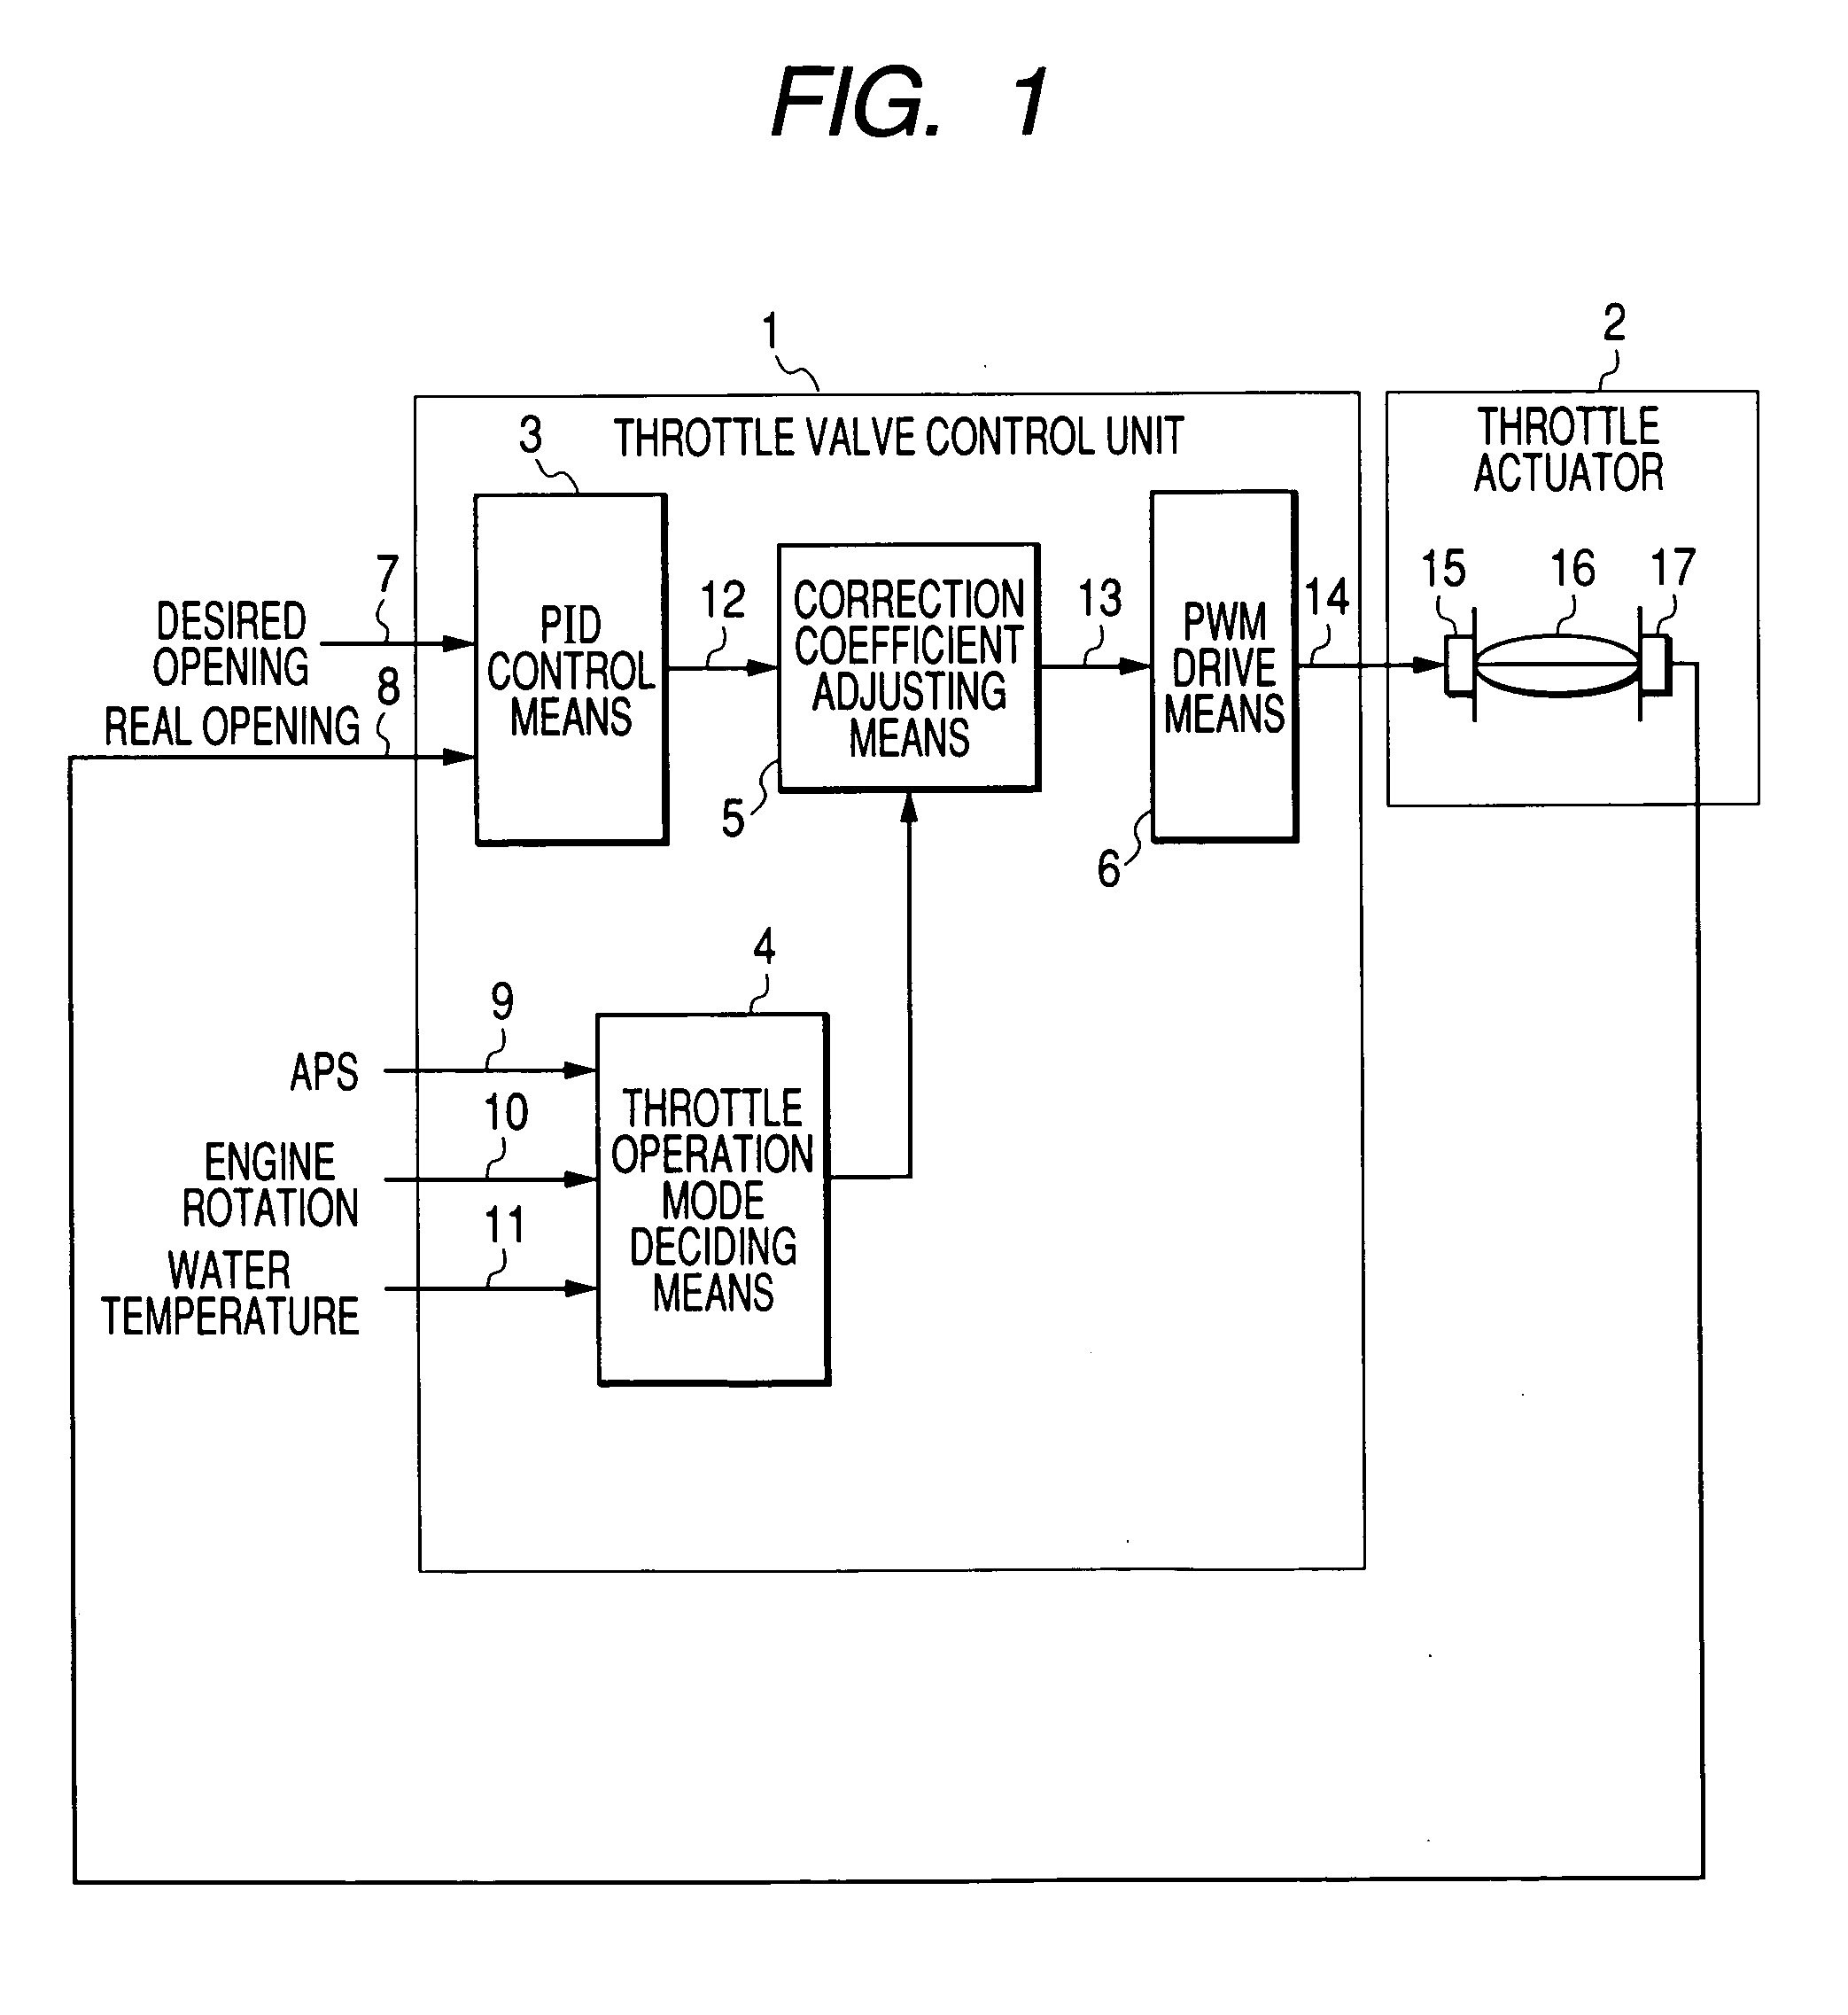 Throttle control device for internal combustion engines